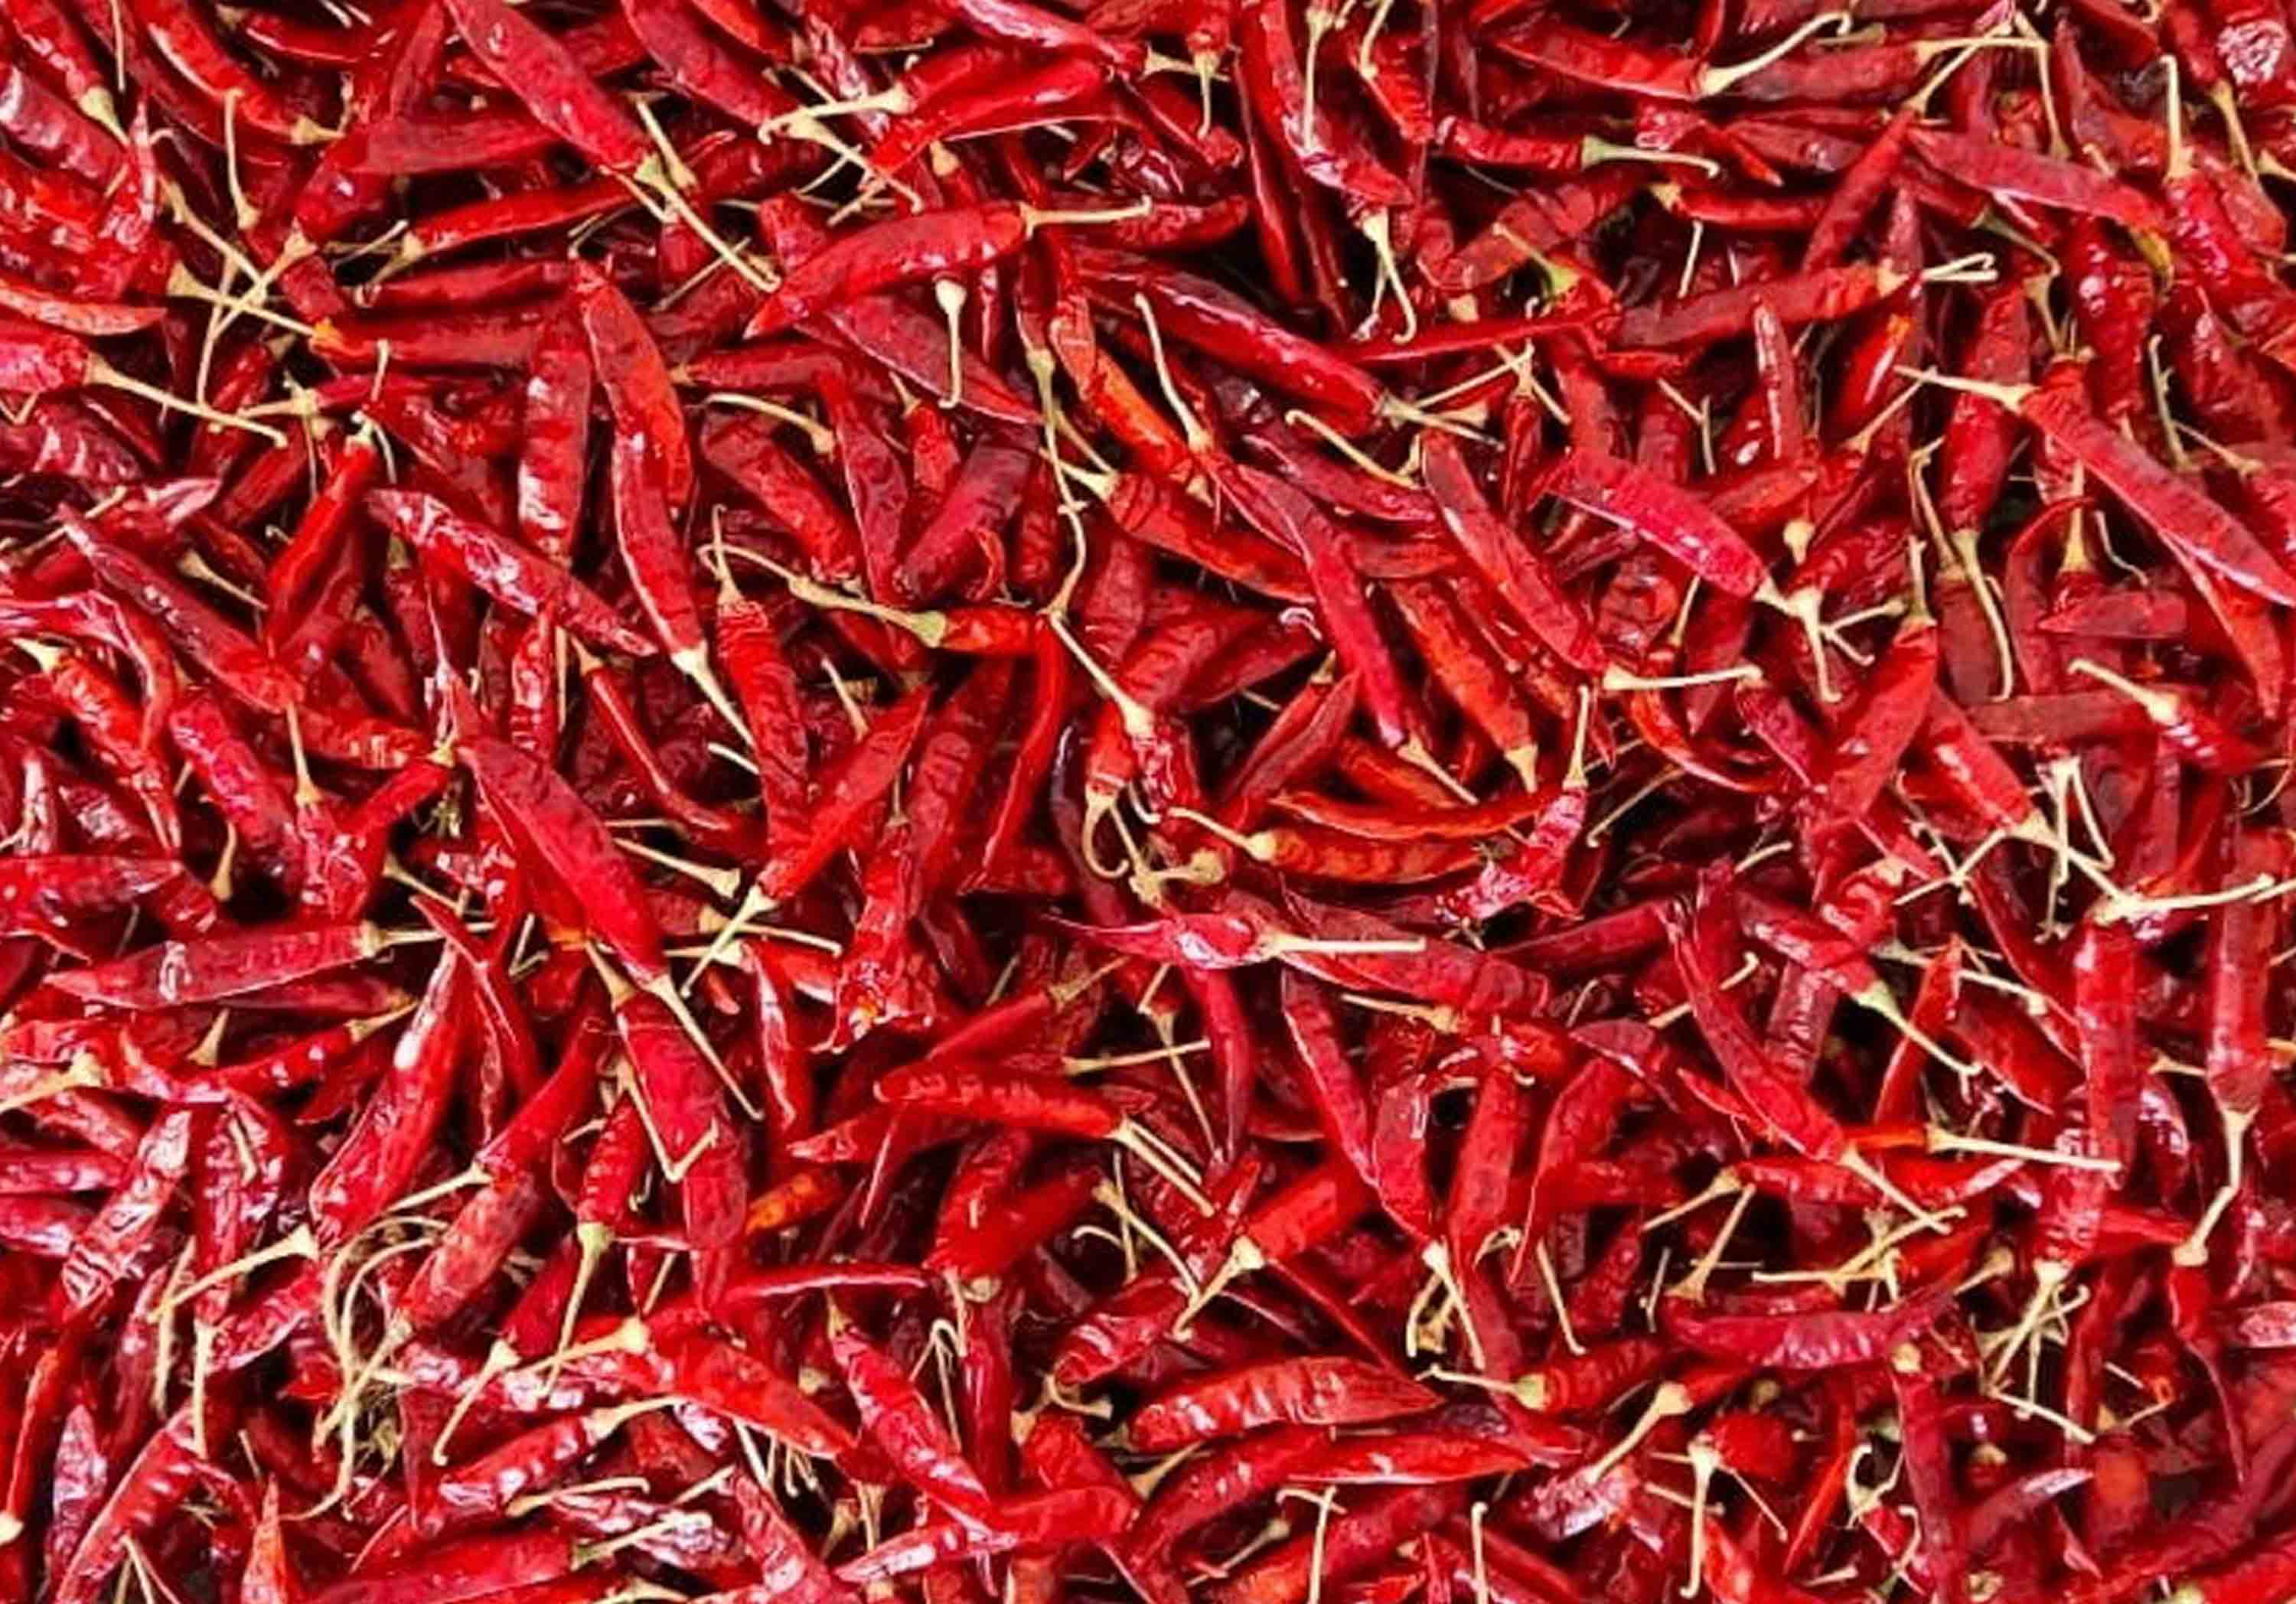 S4 Sannam Dried Red Chilli Suppliers in India